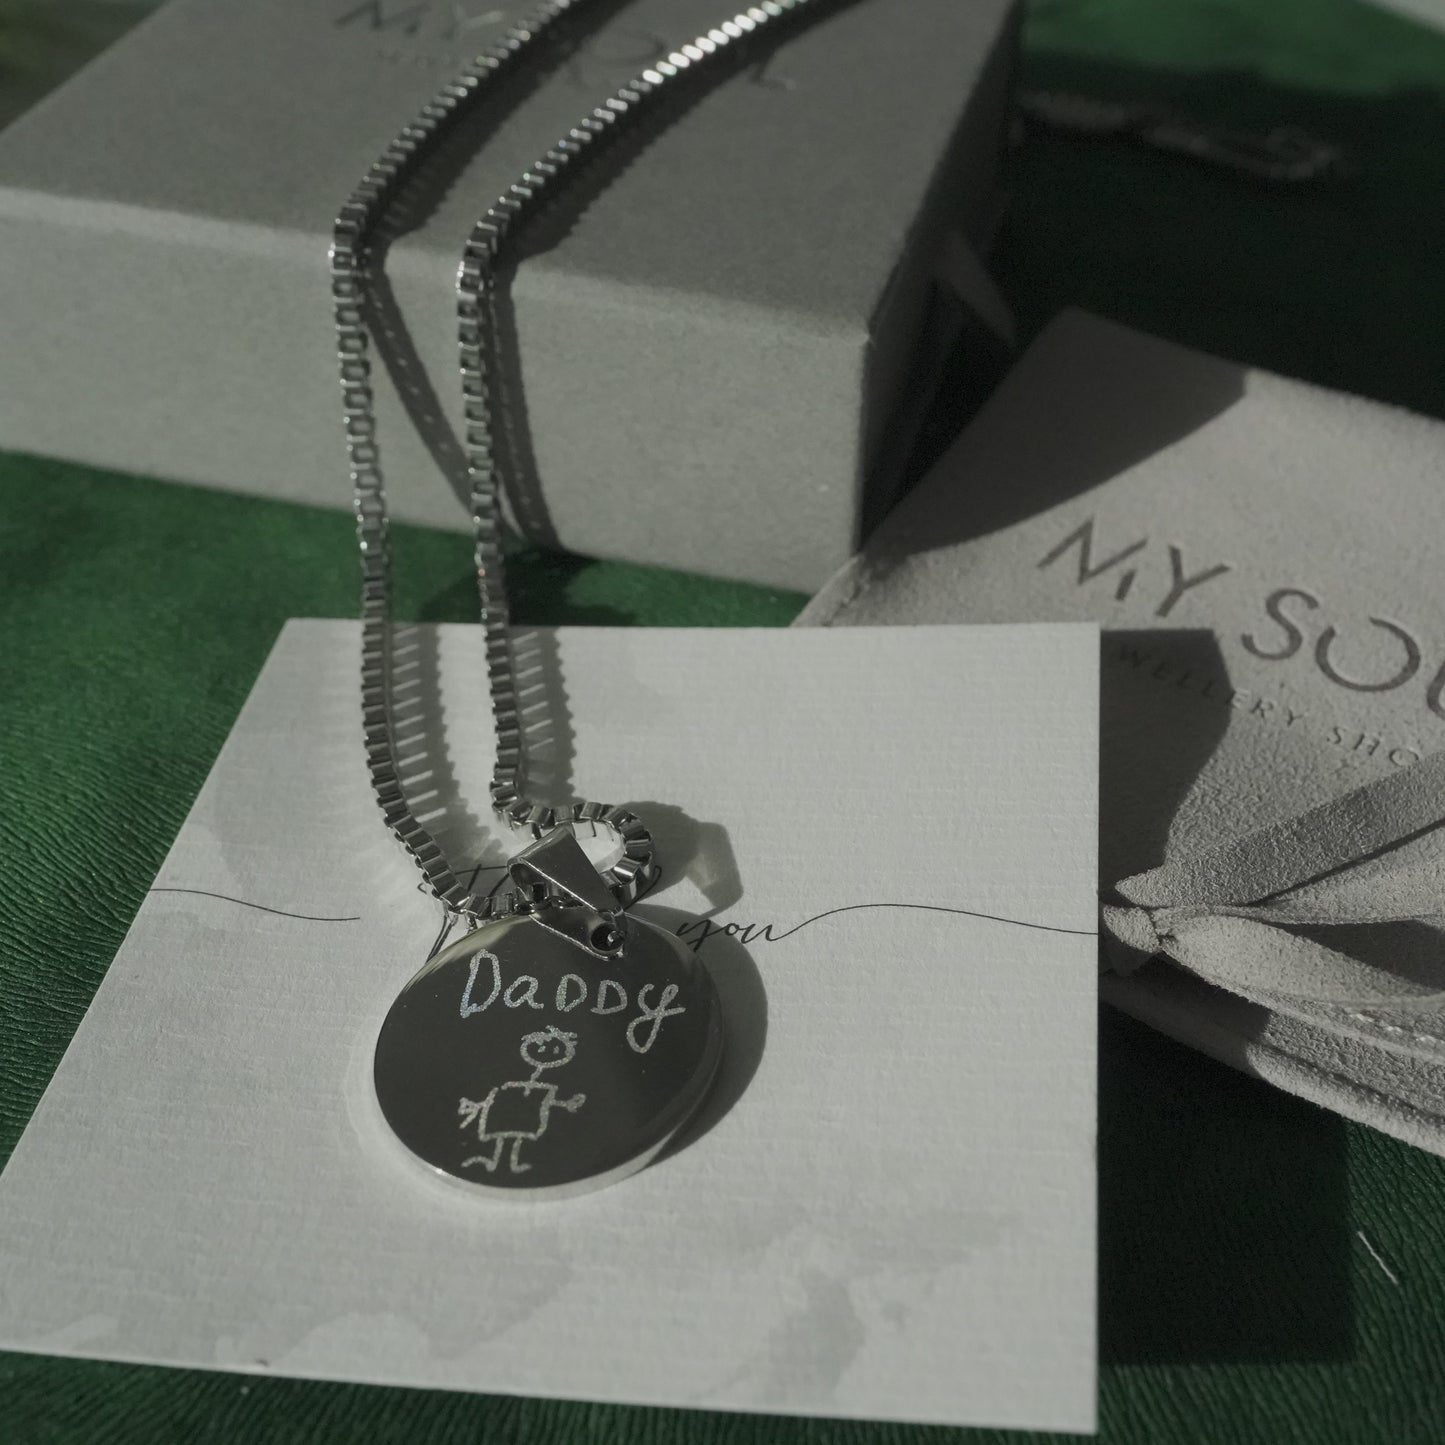 Handwriting Silver Necklace